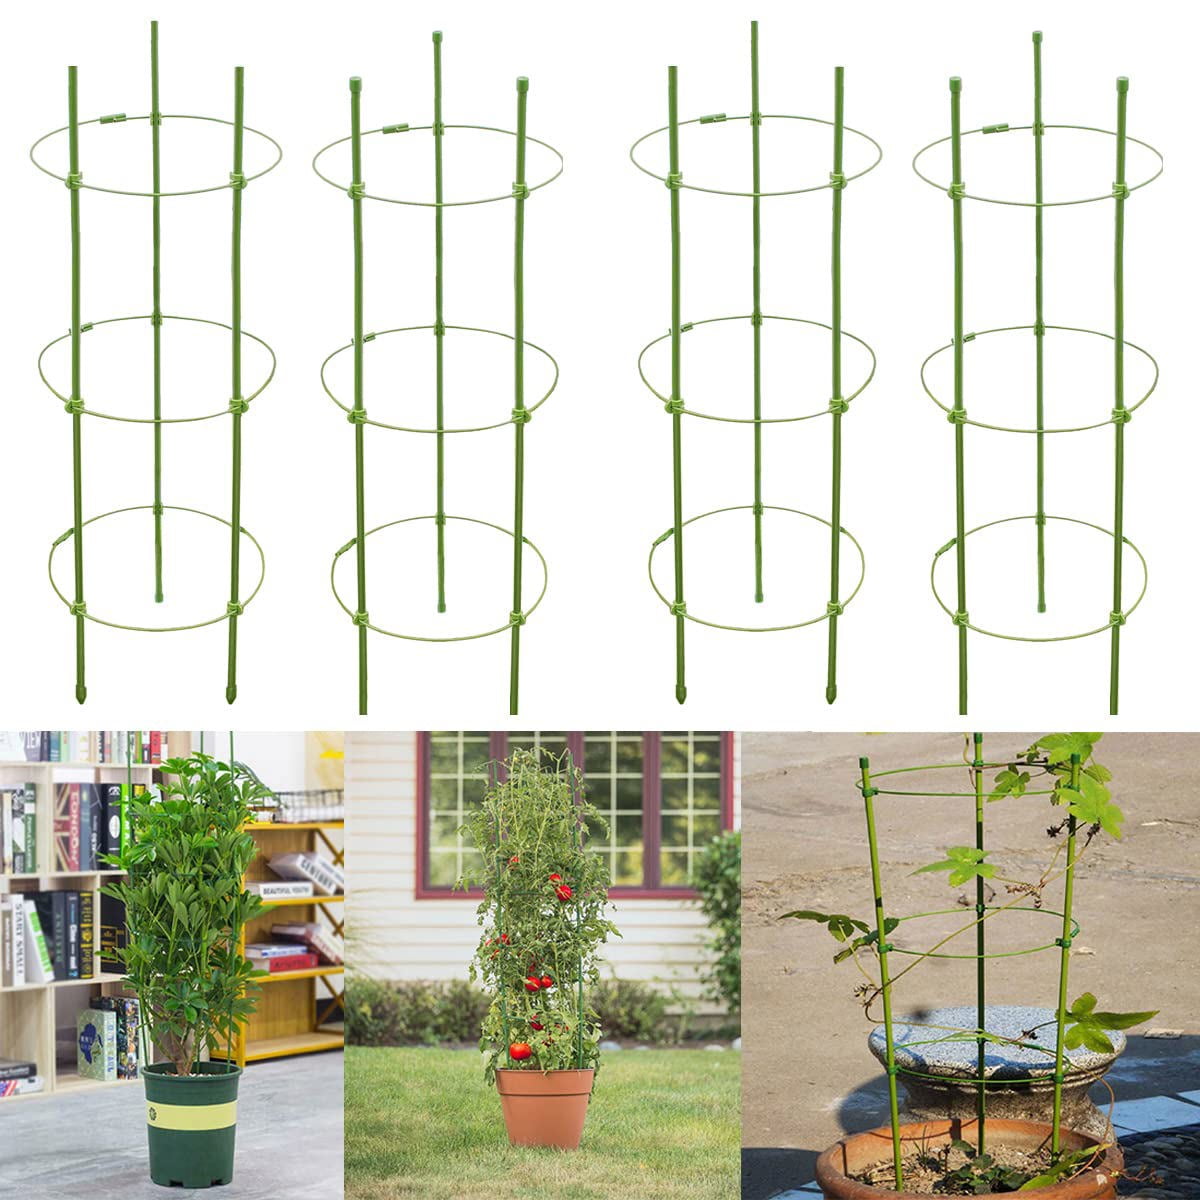 8 Pack Tomato Cages Stands 24" Plants Supports Garden Trellises Tomatoes Rings 